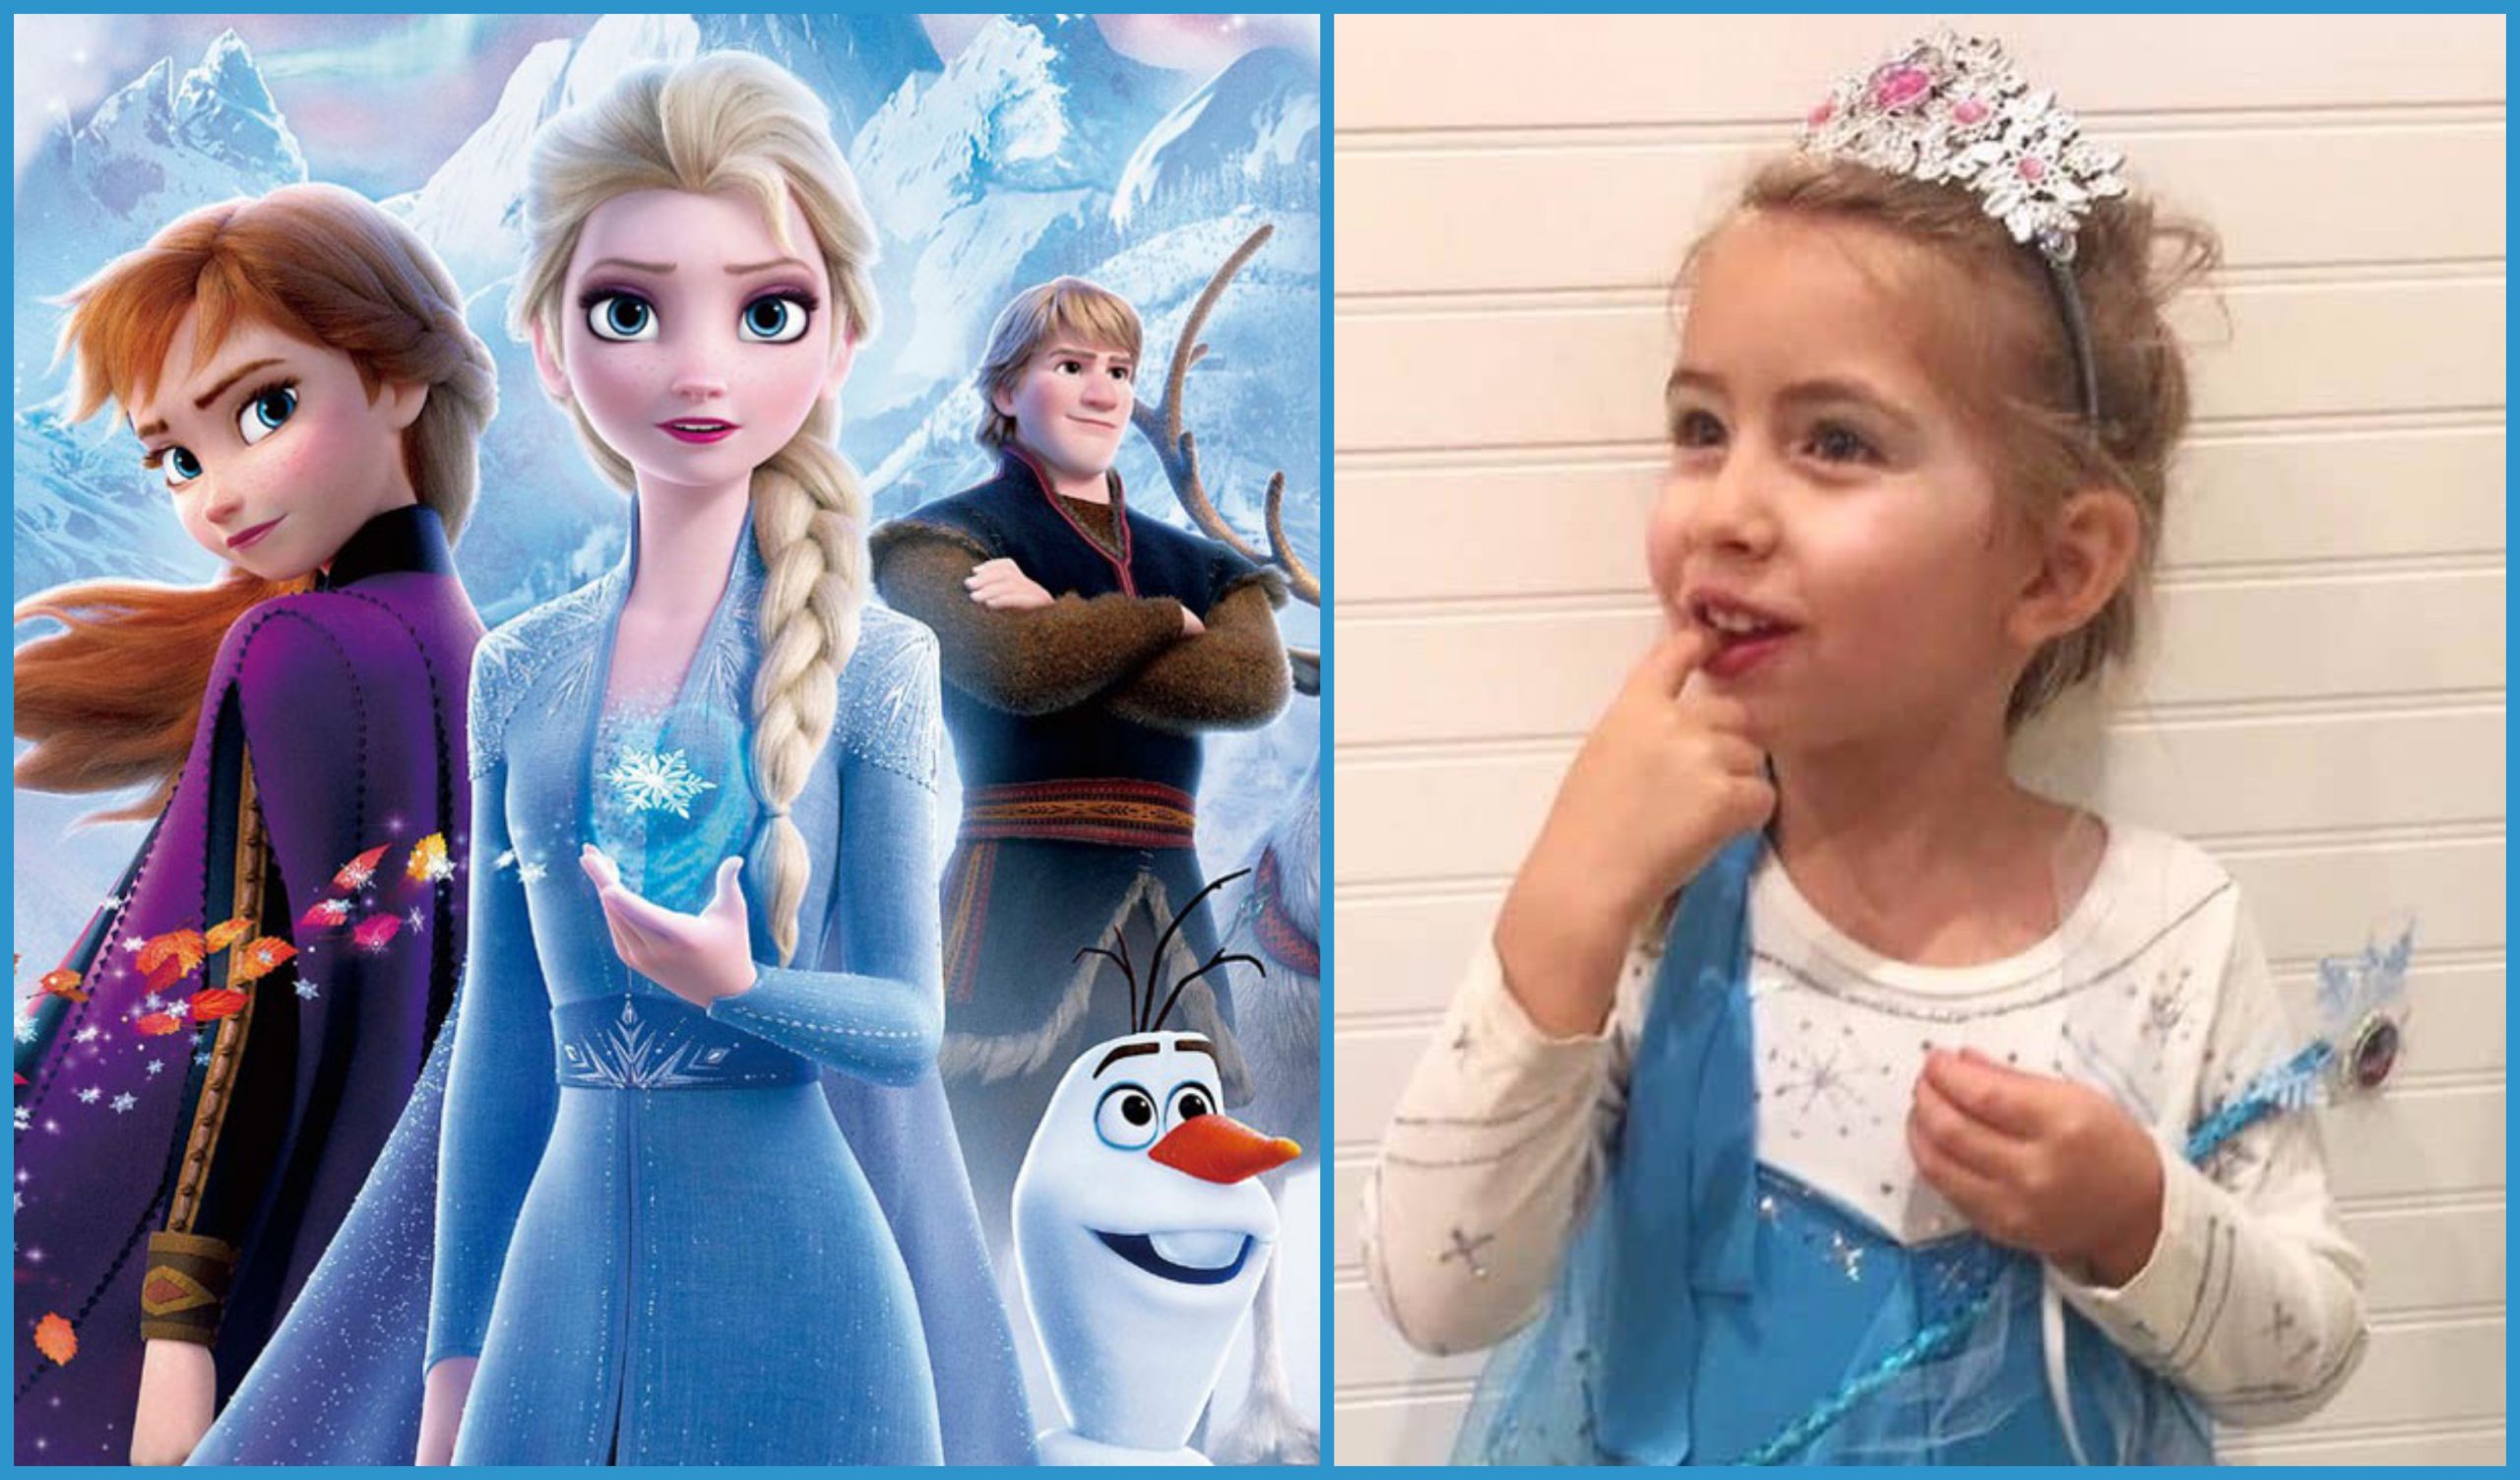 Disney Grants ‘Frozen II’ Wish For Gravely Ill 5-Year-Old Girl